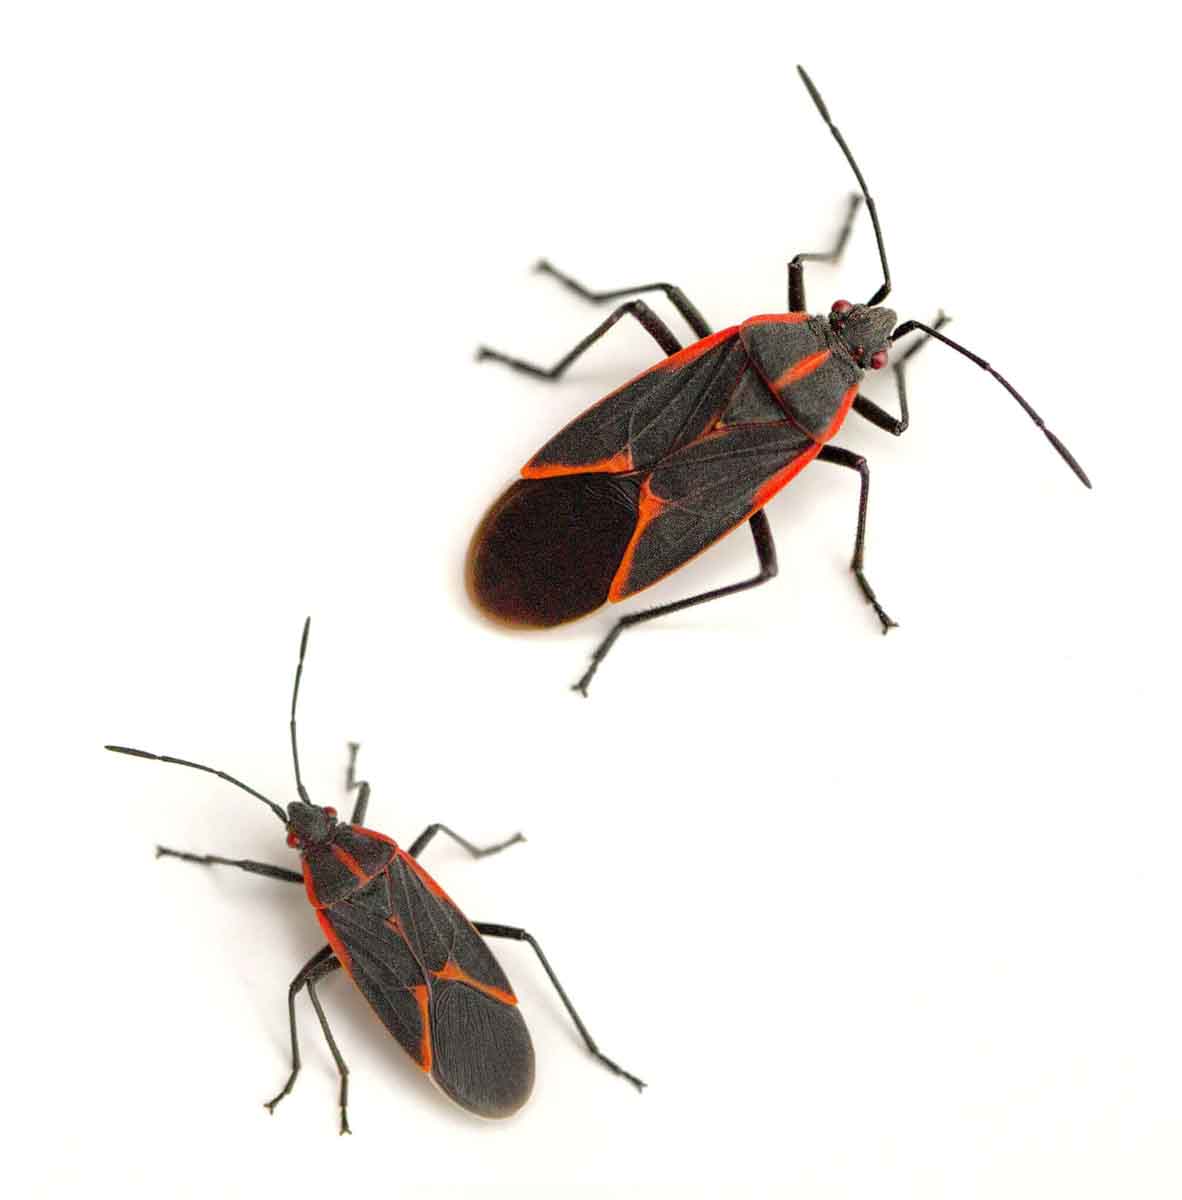 Where Can I Find Boxelder Bugs?